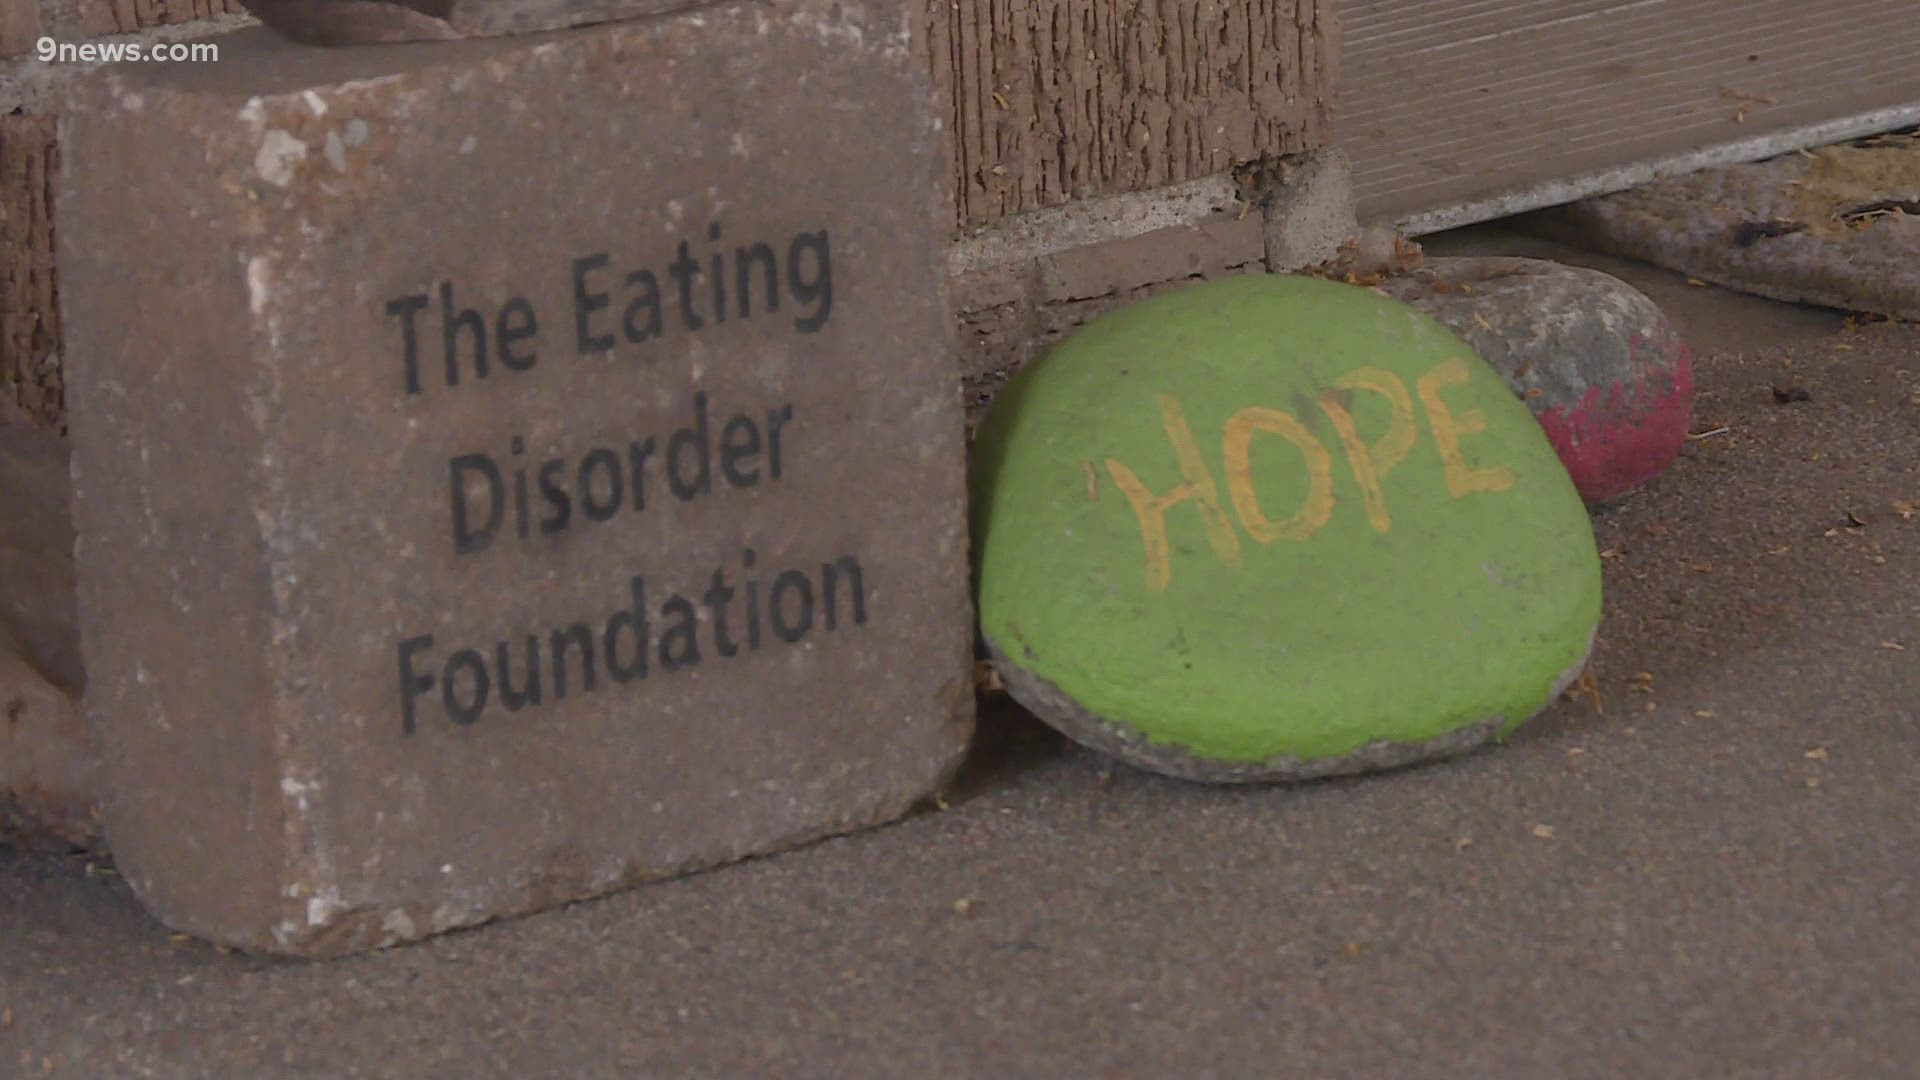 The Eating Disorder Foundation saw a 1030% increase in new monthly support group members since the beginning of the pandemic.